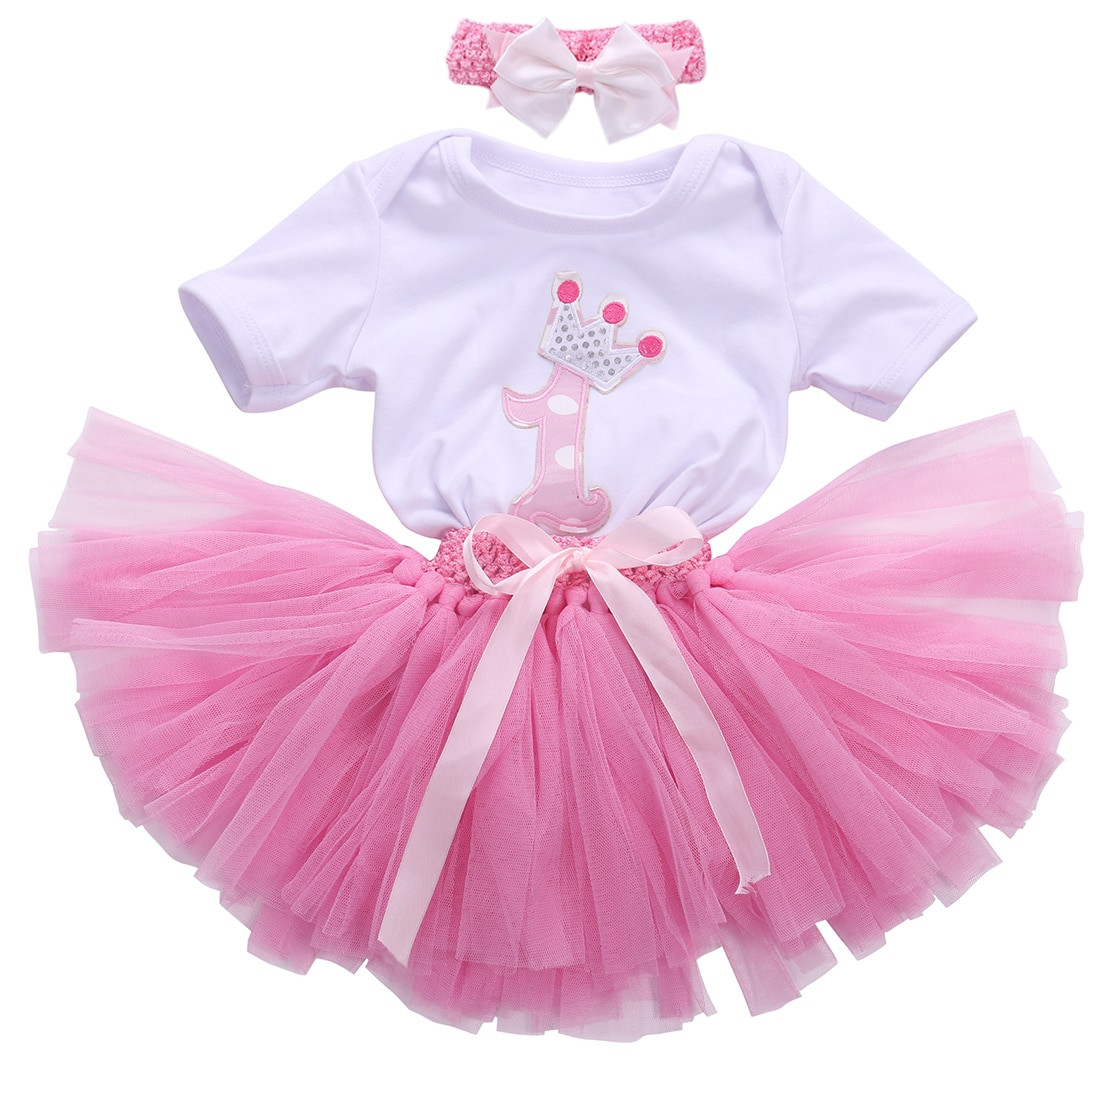 Baby Girl Fashion Clothes
 Hot Fashion Baby Girl Birthday Outfit Toddler White